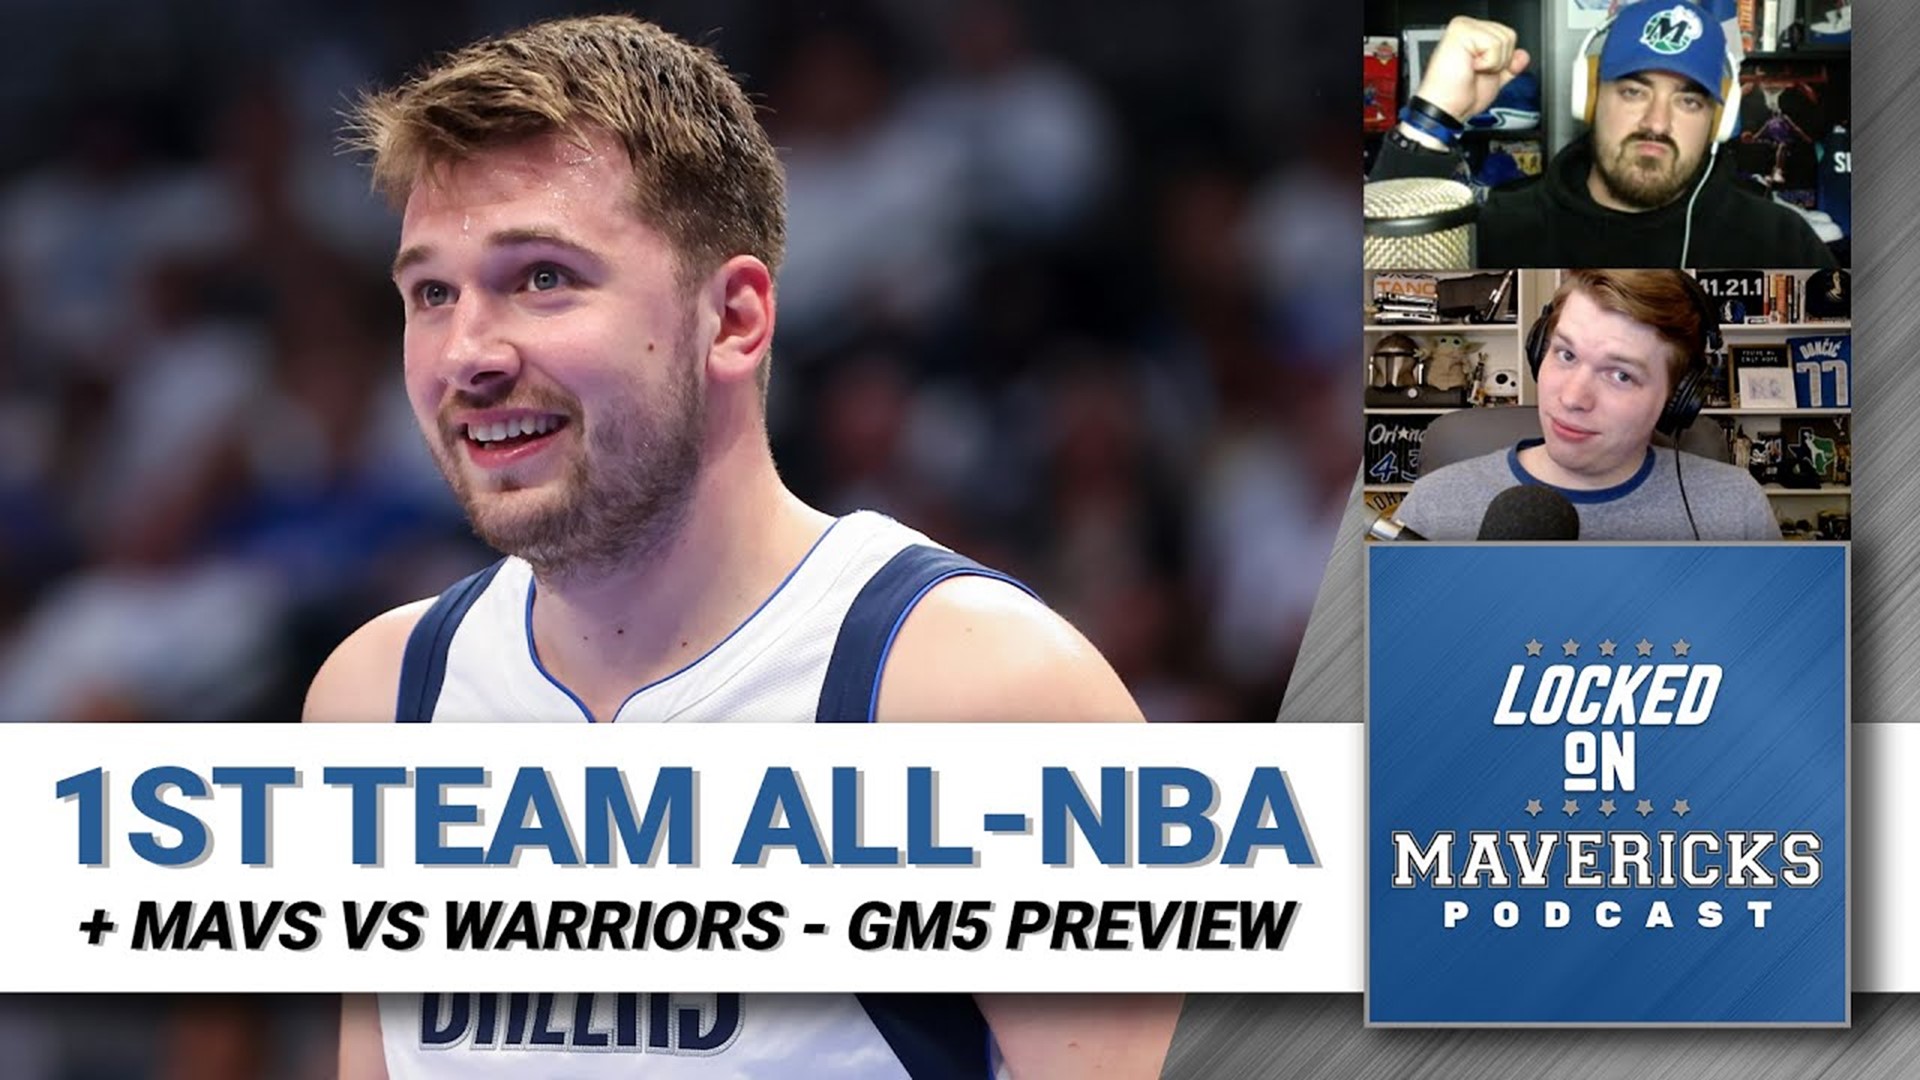 Nick Angstadt & Isaac Harris preview Game 5 of the Western Conference Finals between the Mavs and Warriors.